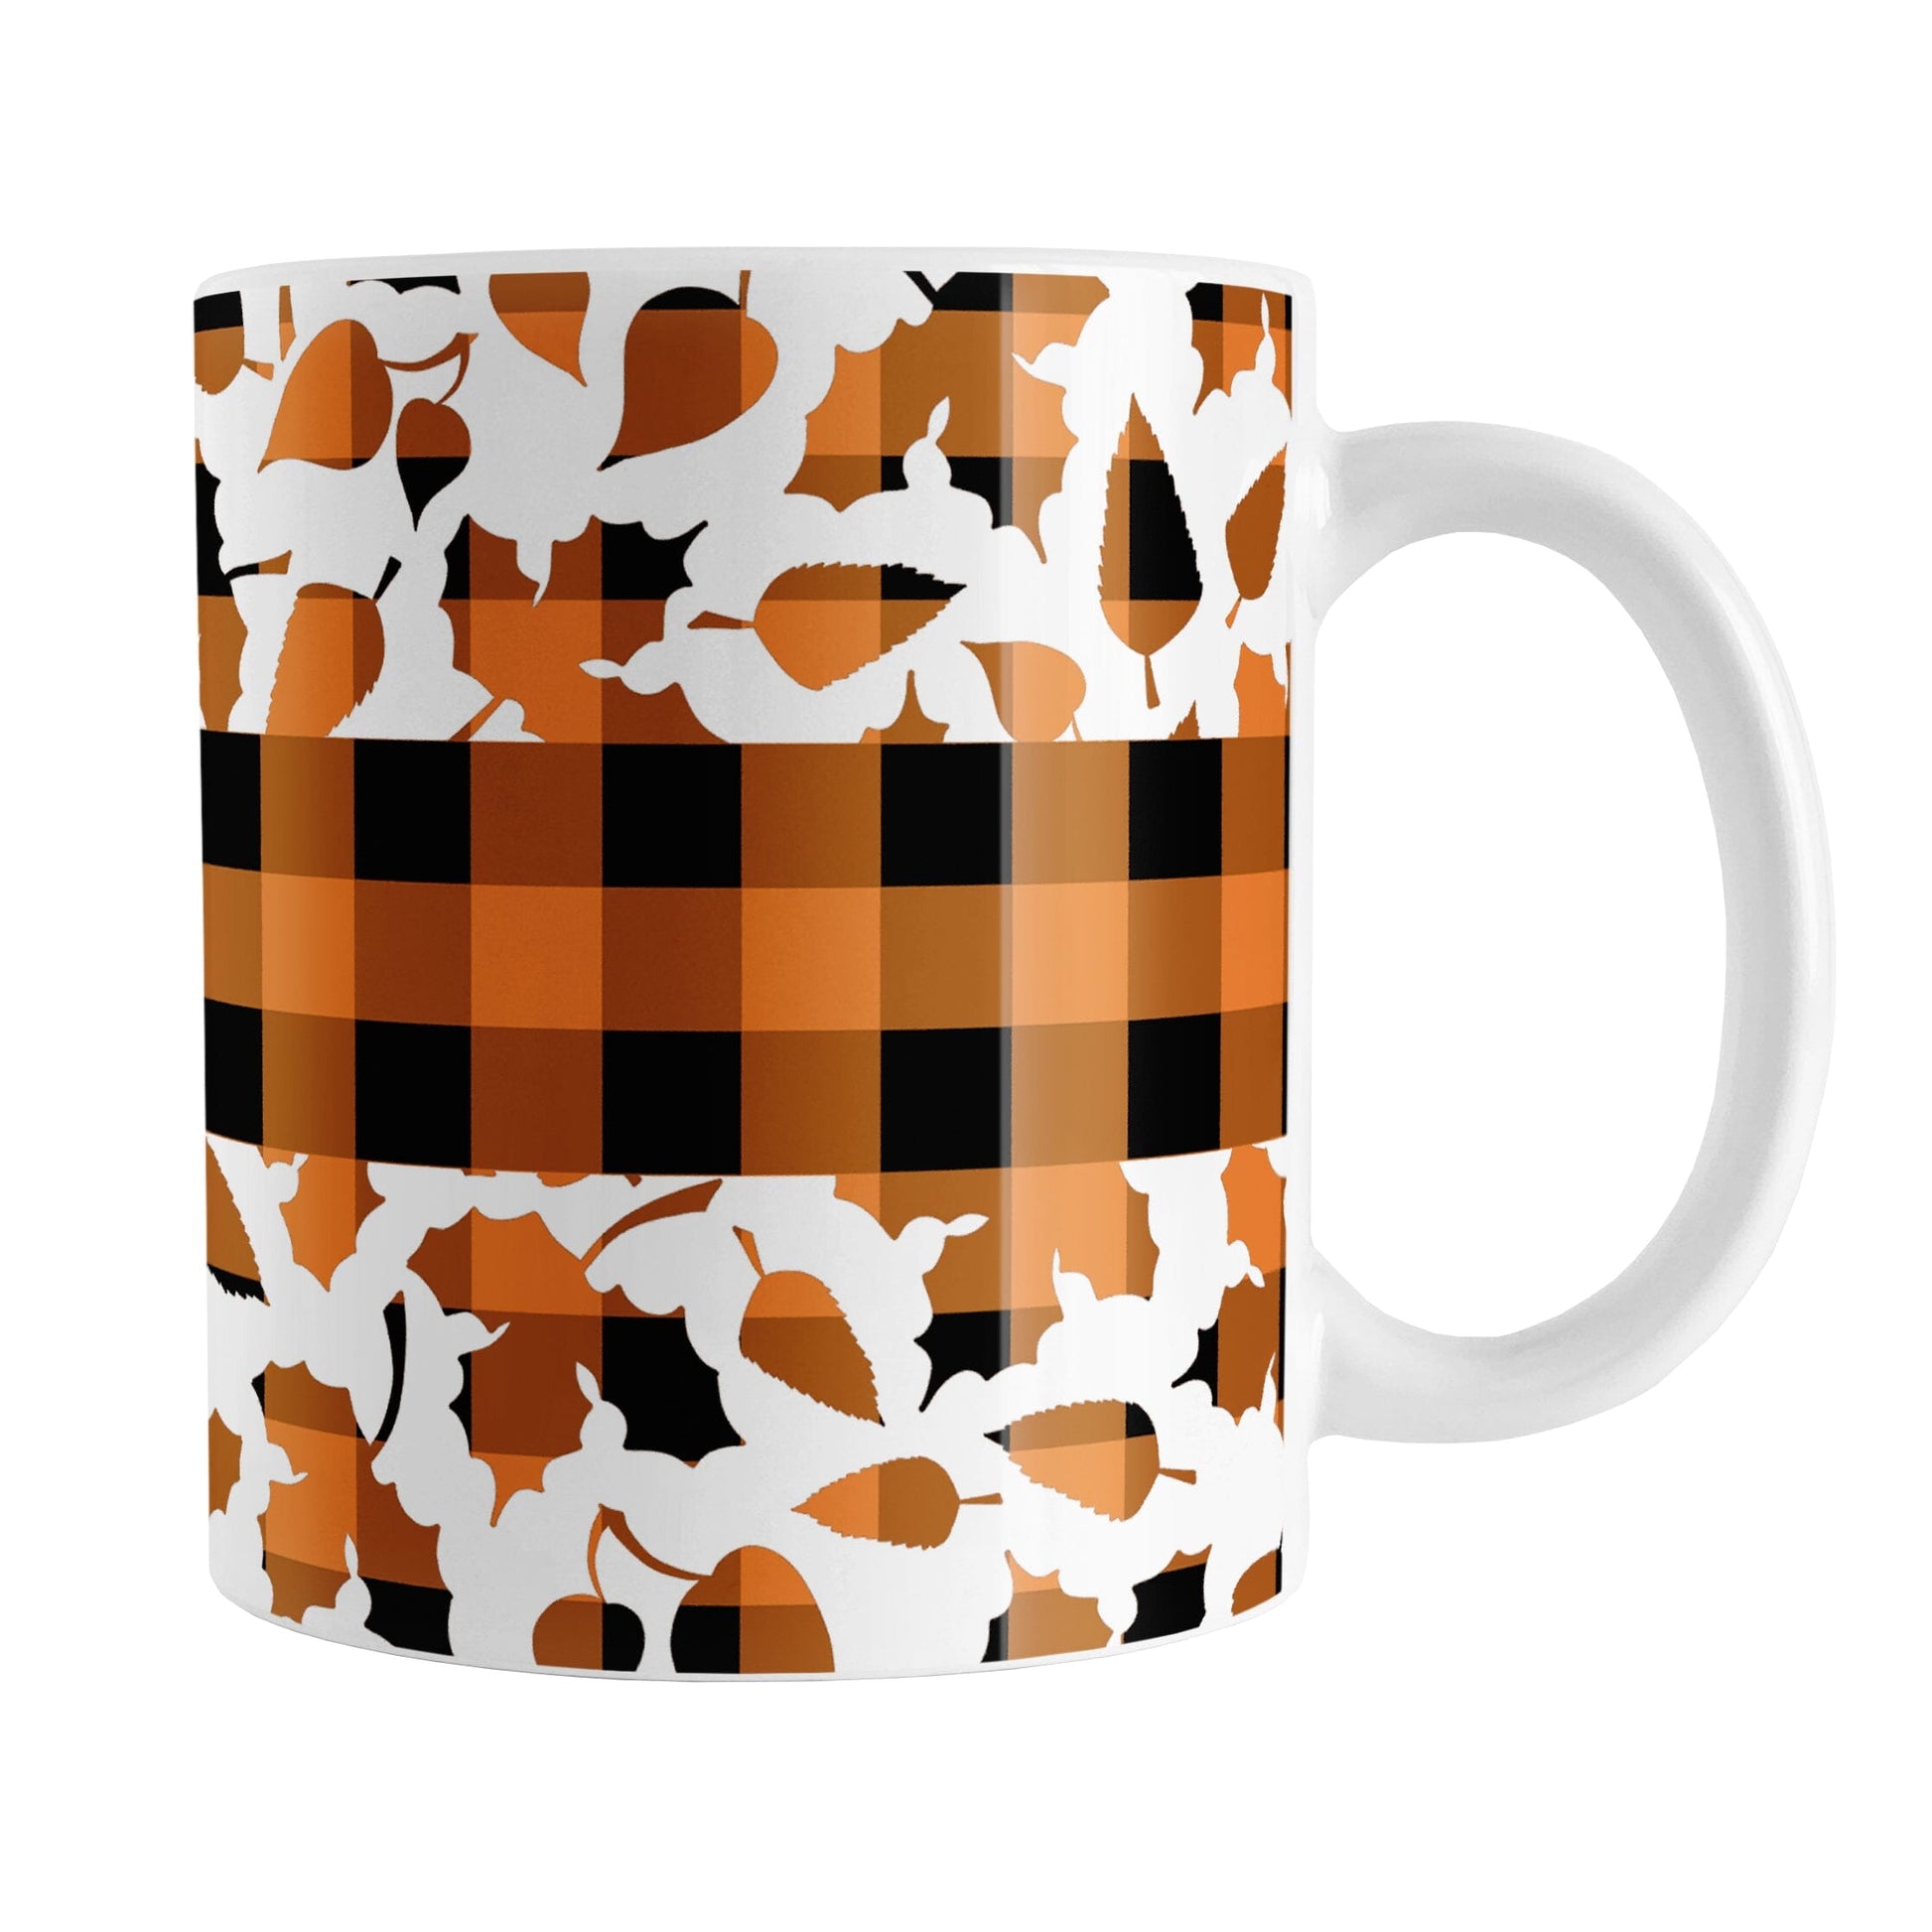 Orange Buffalo Plaid Leaves Fall Mug (11oz) at Amy's Coffee Mugs. A ceramic coffee mug designed with a pattern of leaves with an orange and black buffalo plaid pattern and a buffalo plaid stripe across the center over the leaves. This design wraps around the mug to the handle.